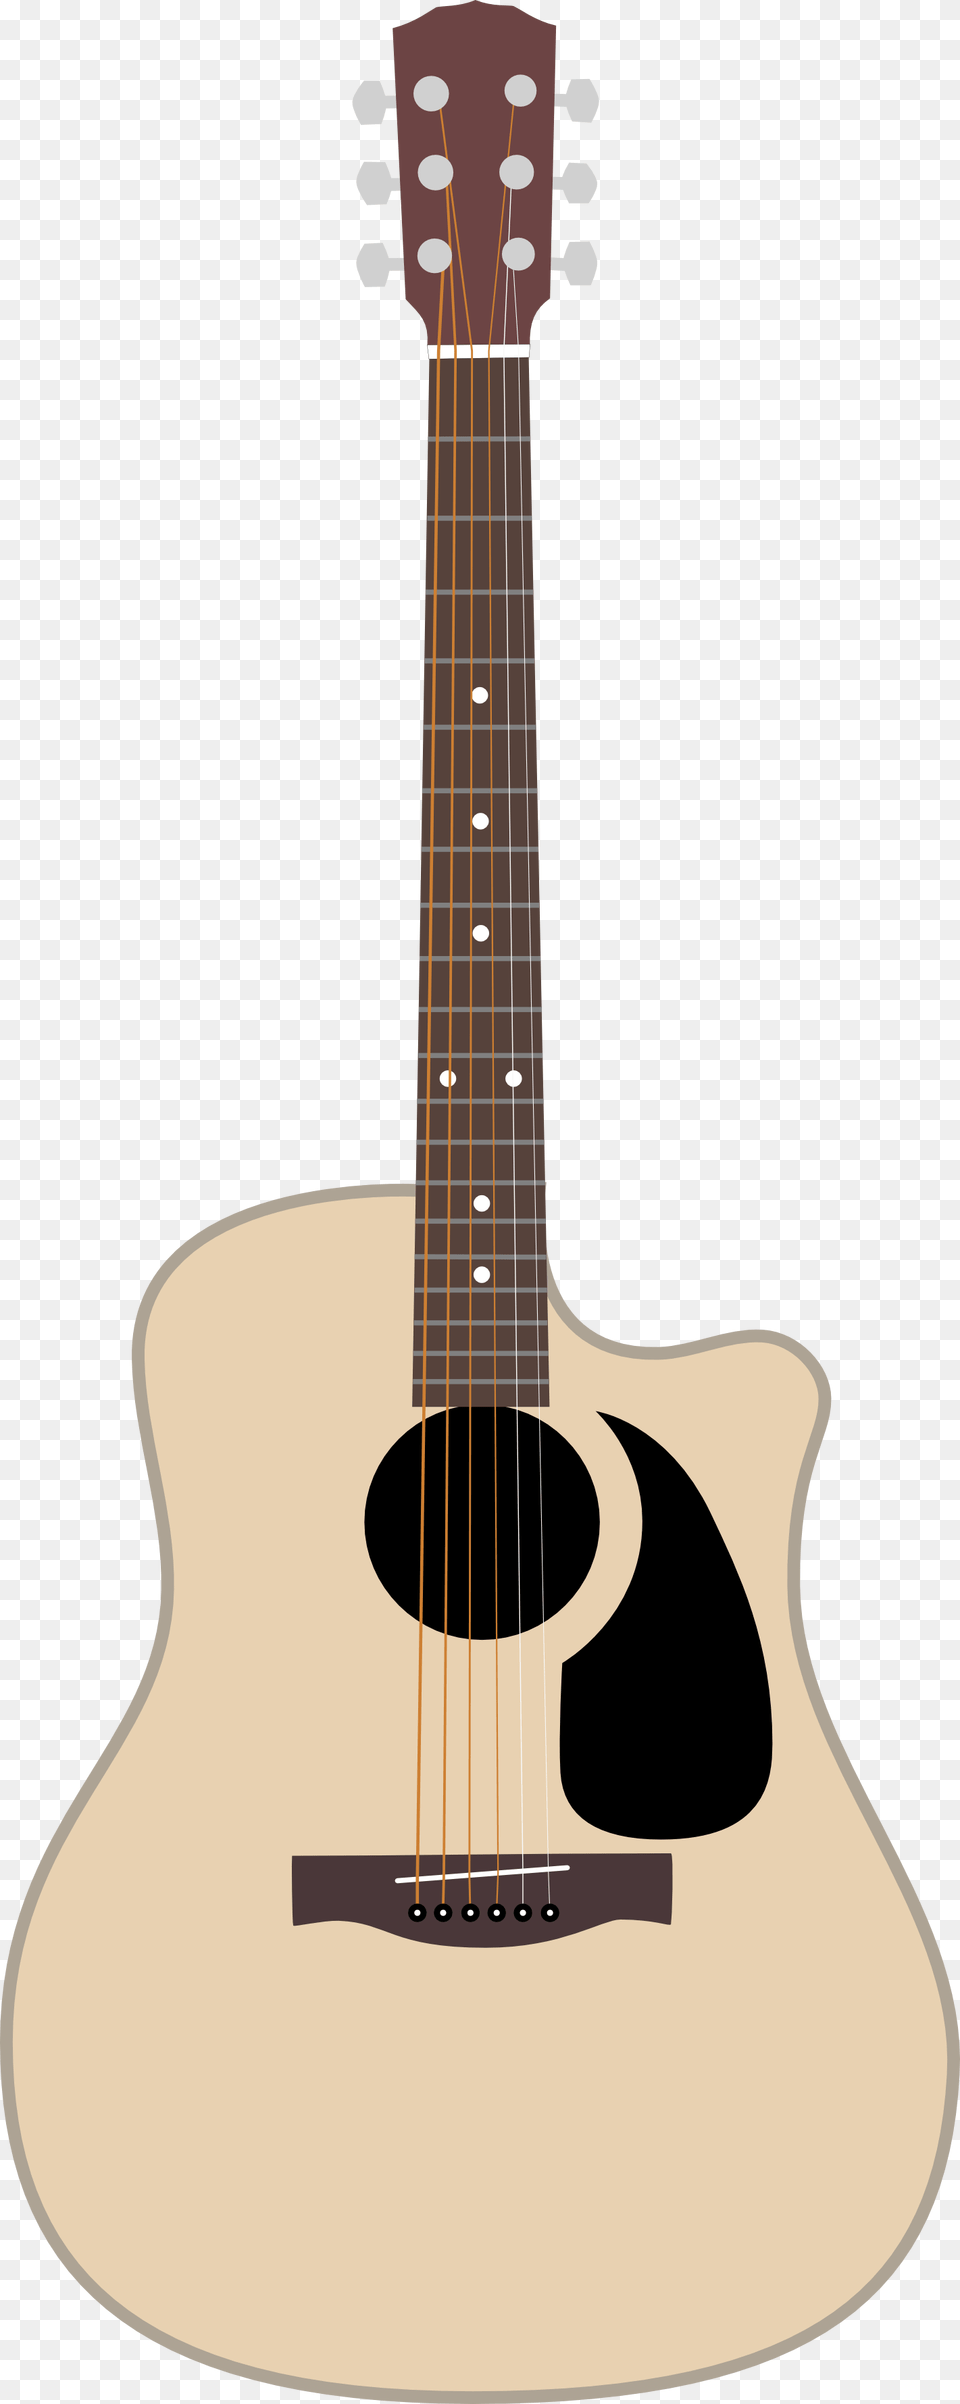 Fender Cd 100ce Acoustic Guitar By Shimmerscroll Acoustic Guitar, Musical Instrument, Bass Guitar Png